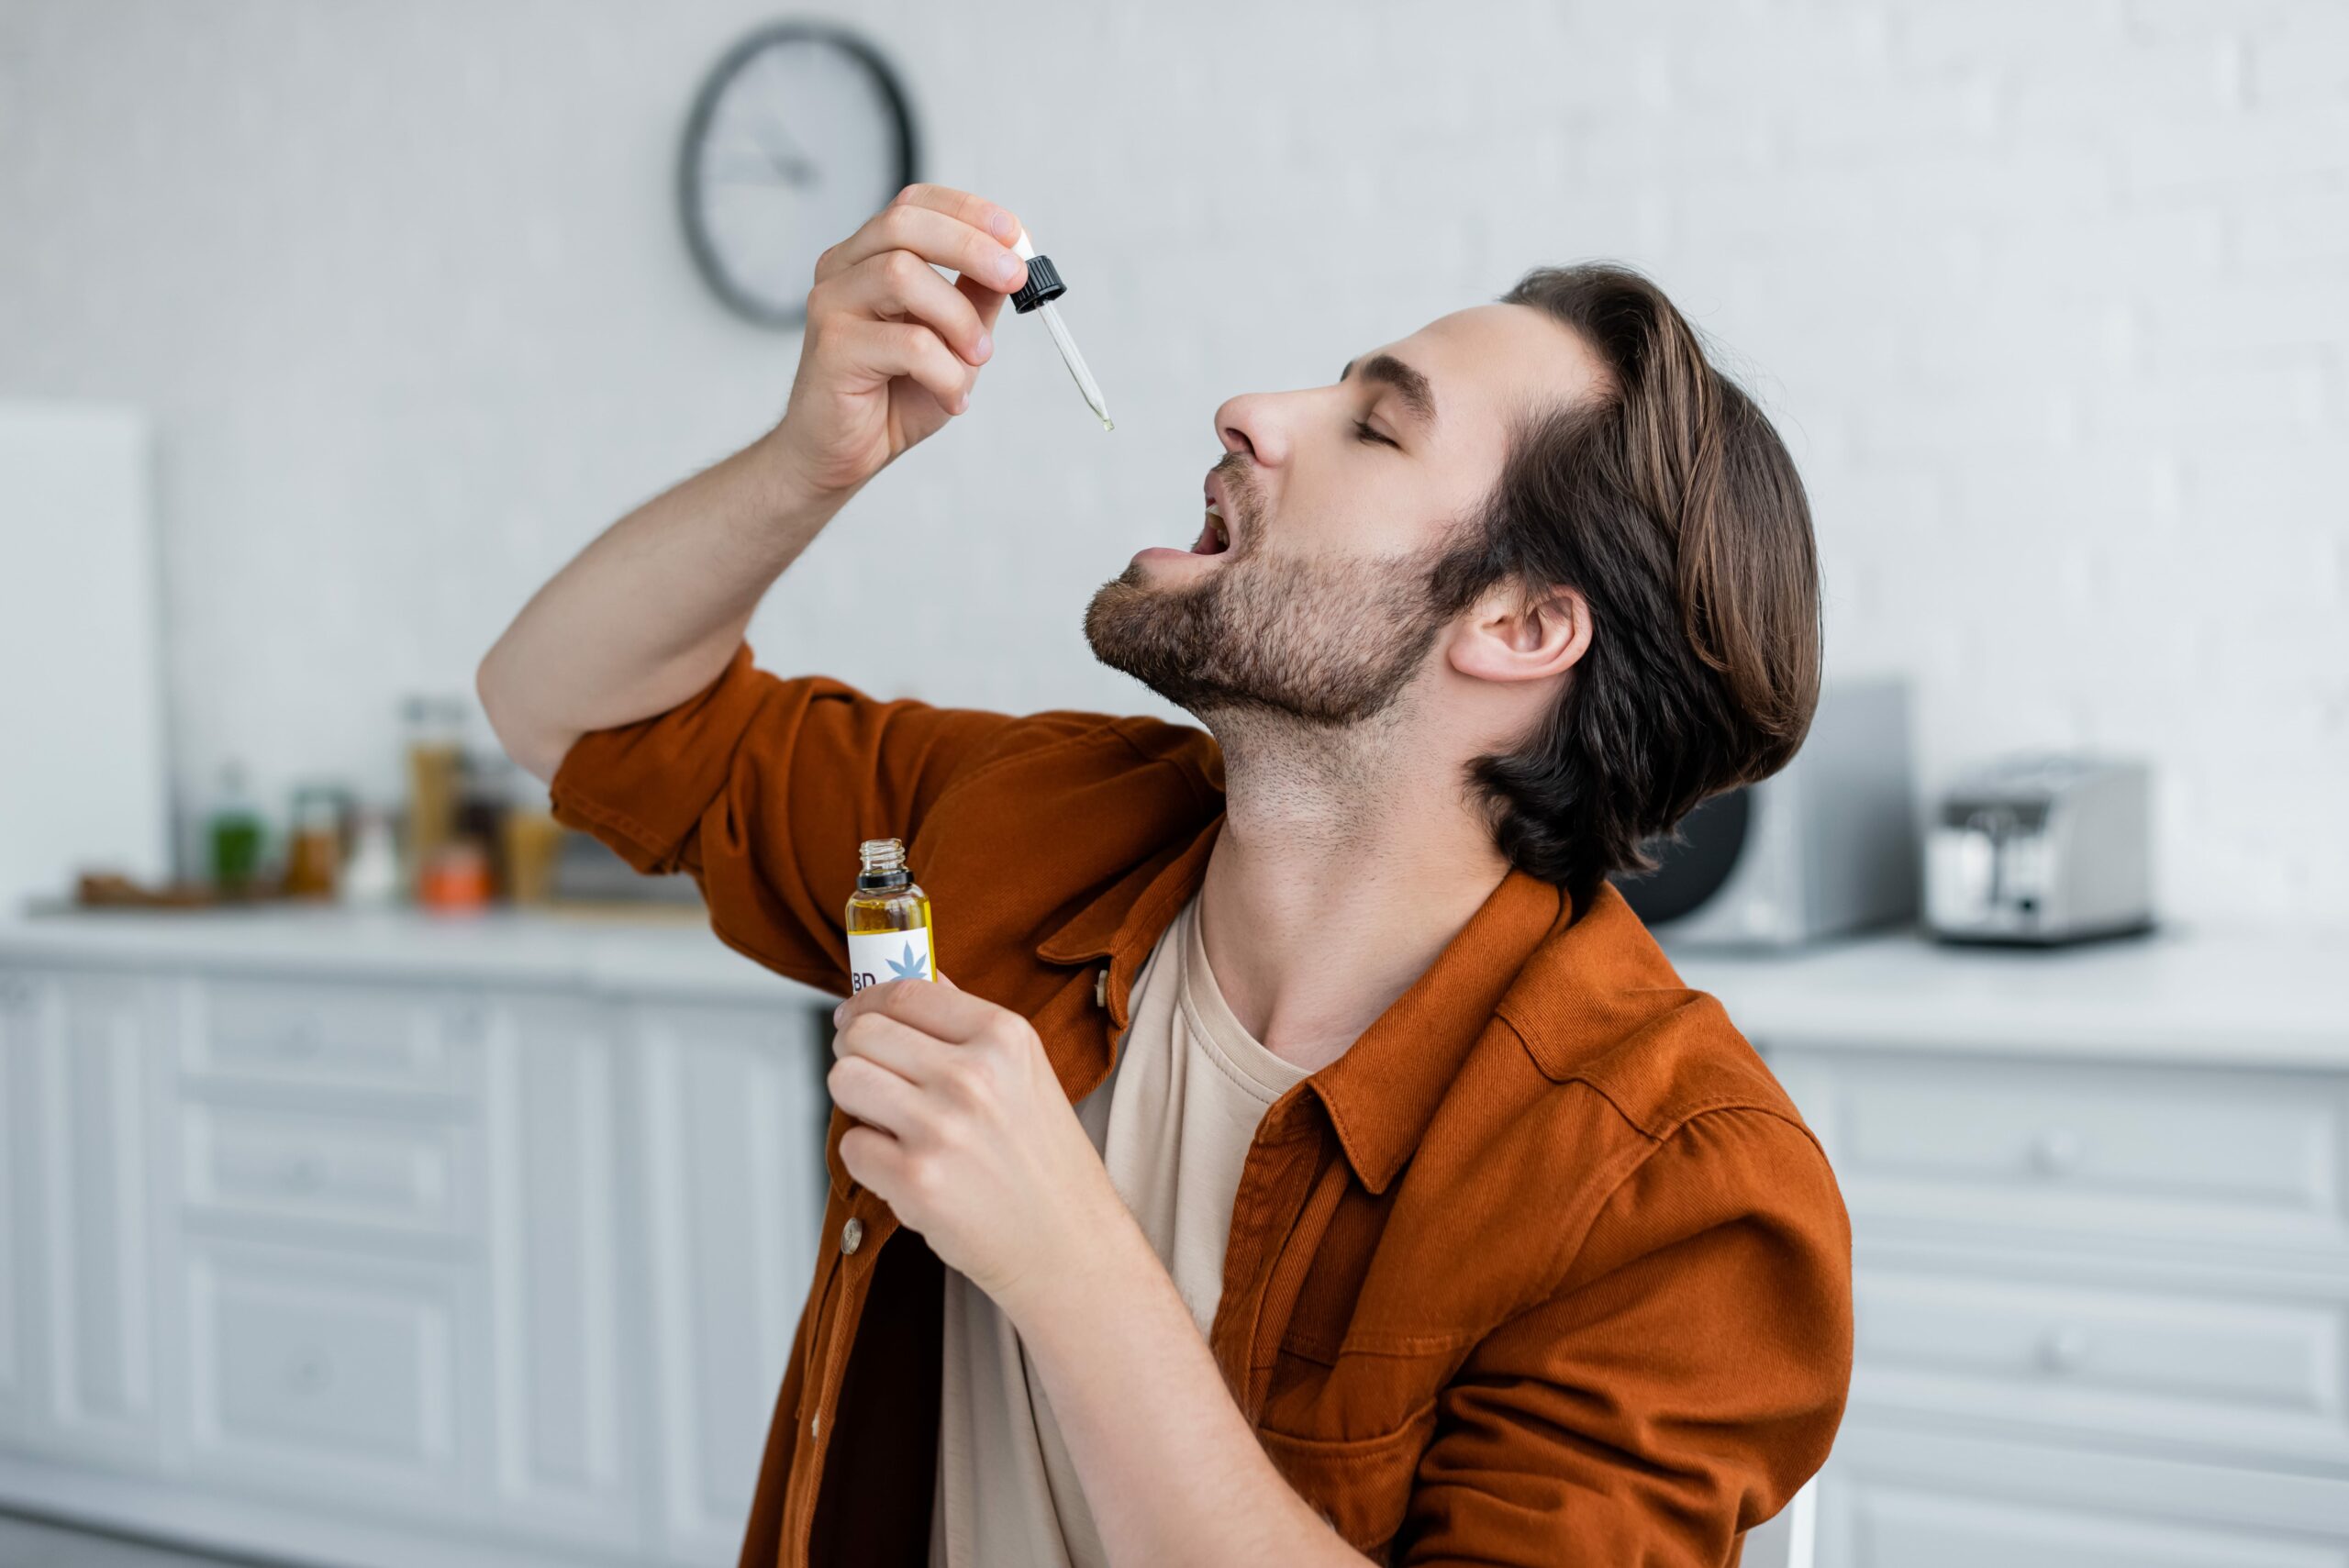 EATING HEALTHIER: TIPS ON COOKING WITH CBD OIL